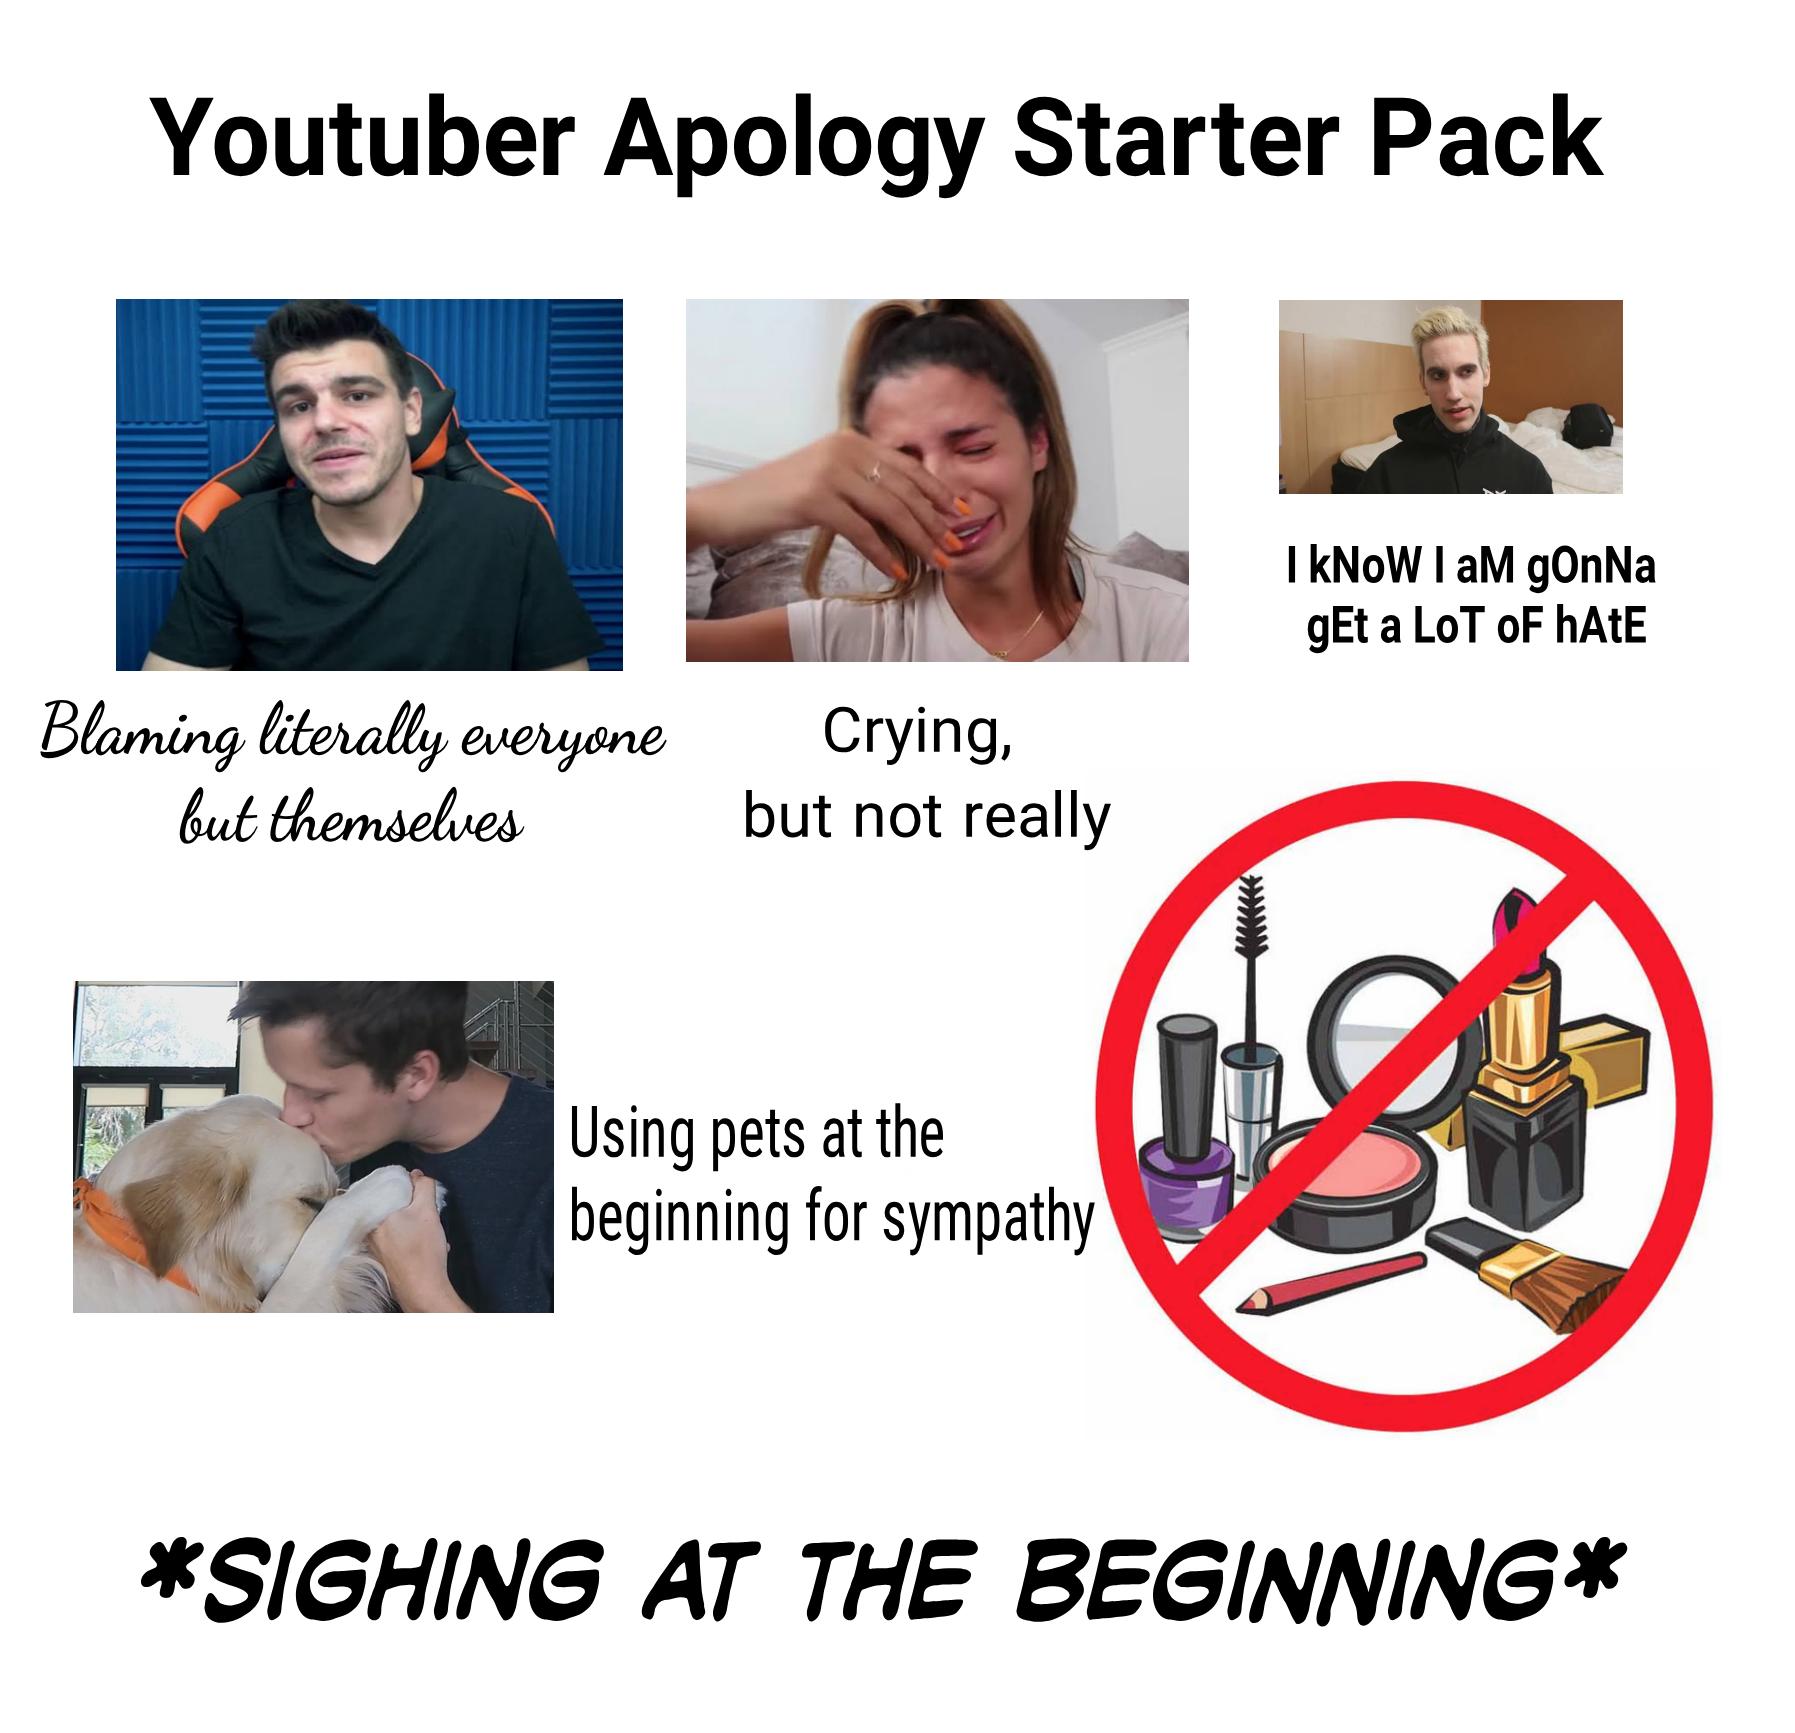 apology video starter pack - Youtuber Apology Starter Pack I Know I am gOnNa gEt a Lot Of hAtE Blaming literally everyone but themselves Crying, but not really Using pets at the | beginning for sympathy Sighing At The Beginning